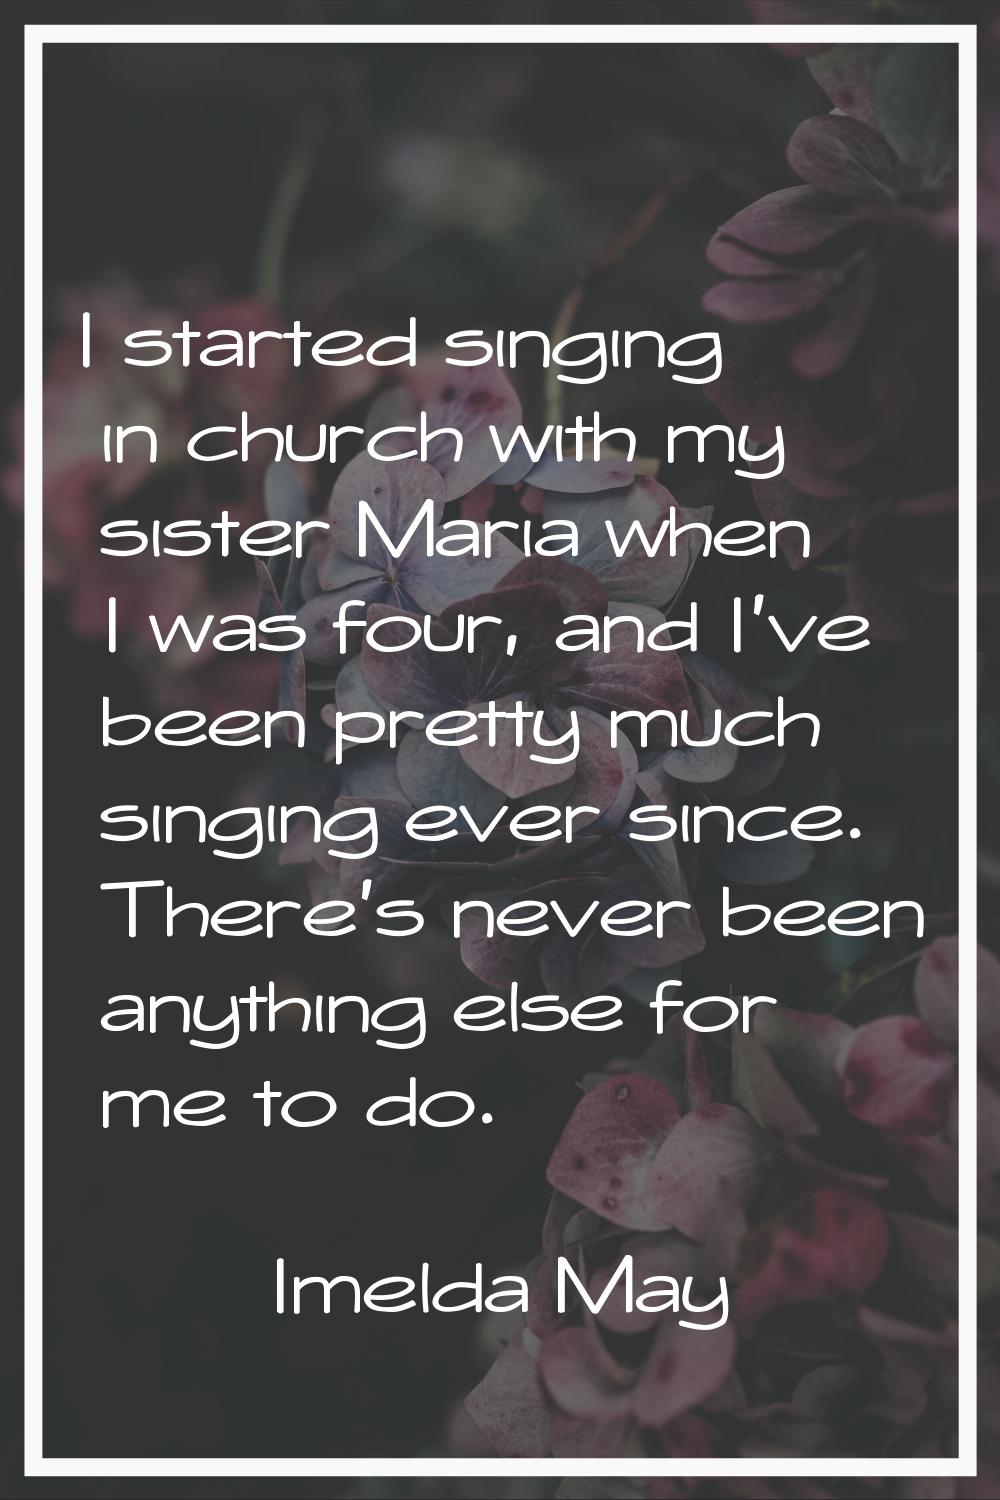 I started singing in church with my sister Maria when I was four, and I've been pretty much singing